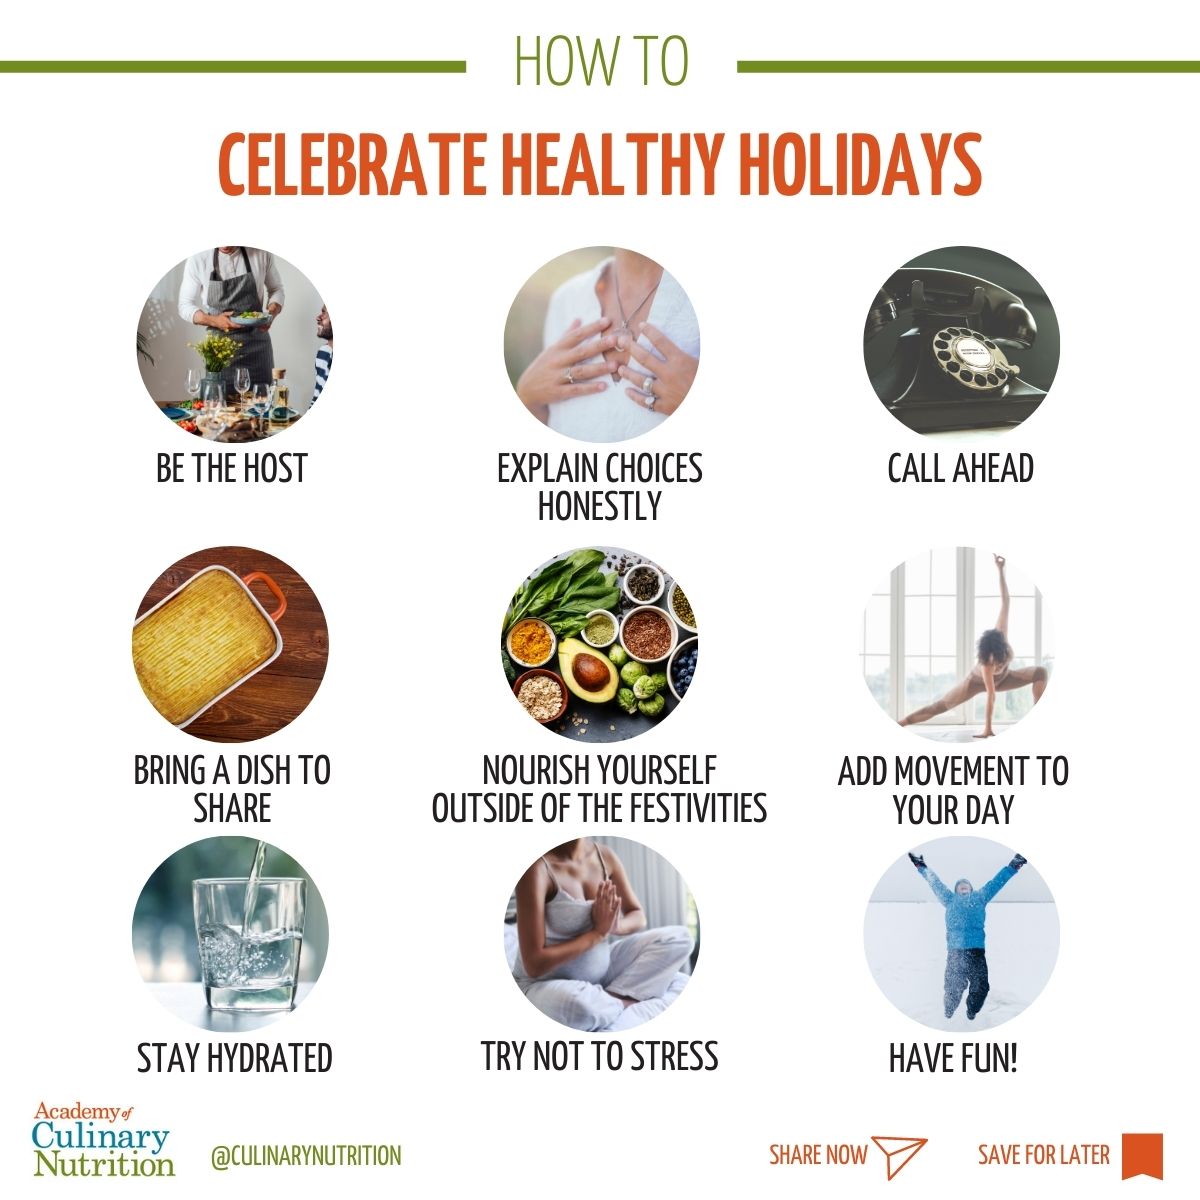 How to Celebrate Healthy Holidays